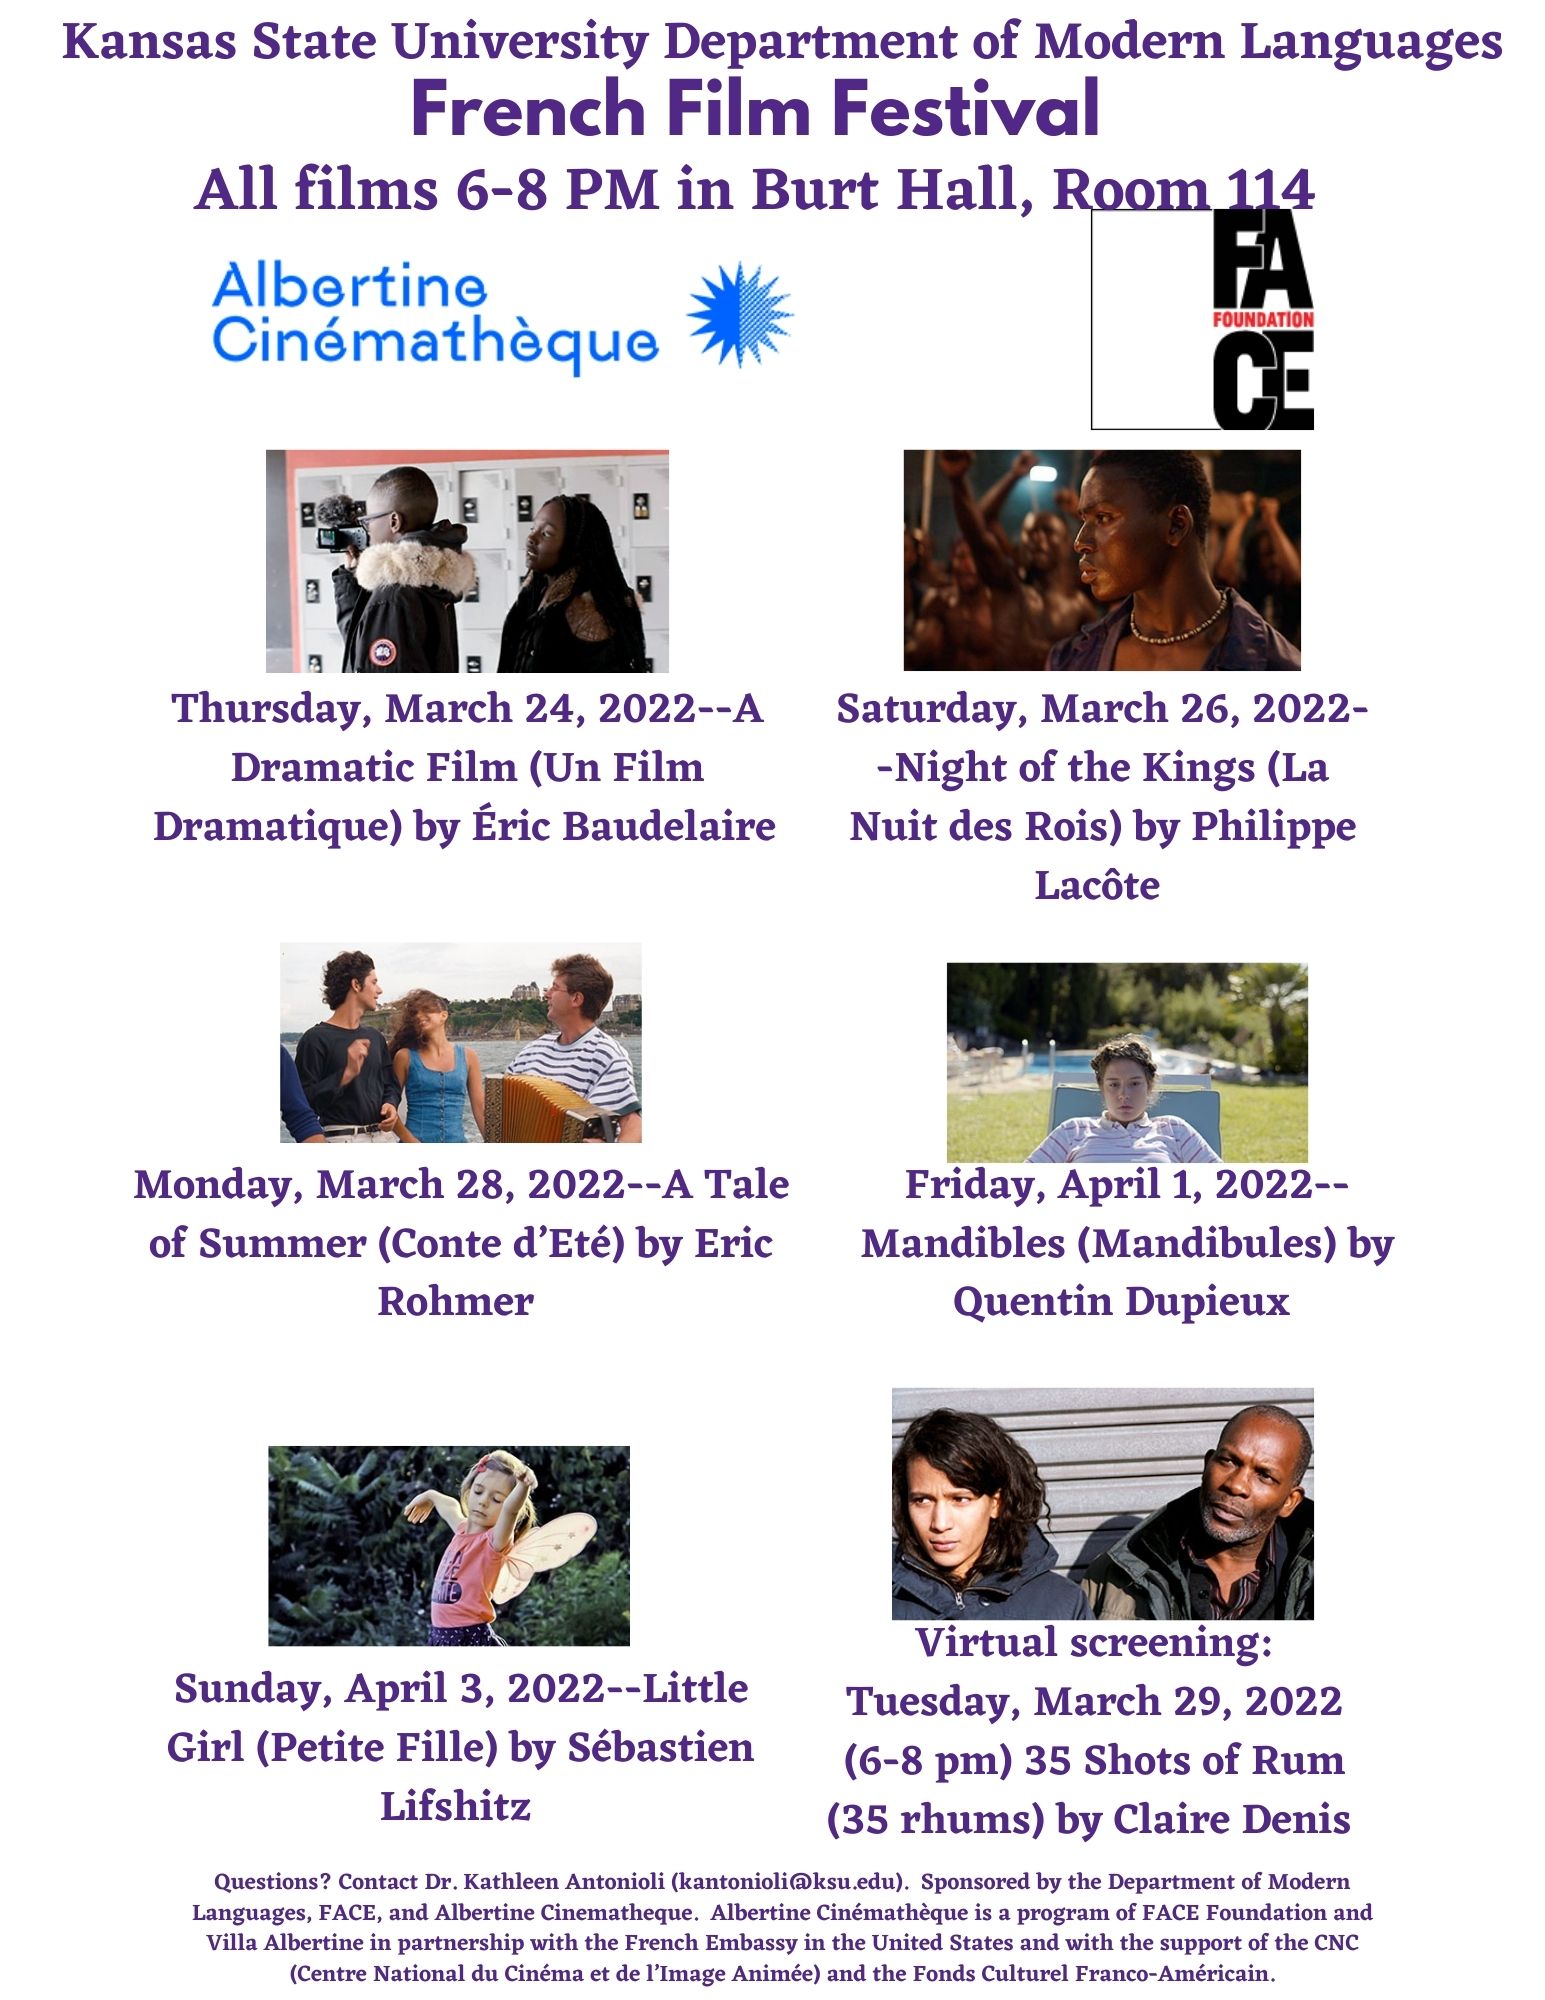 Kansas State University Department of Modern Languages. French Film Festival. All films 6-8 PM in Burt Hall, Room 114. Thursday, March 24, 2022--A Dramatic Film (Un Film Dramatique) by Éric Baudelaire. Saturday, March 26, 2022--Night of the Kings (La Nuit des Rois) by Philippe Lacôte. Monday, March 28, 2022--A Tale of Summer (Conte d’Eté) by Eric Rohmer. Friday, April 1, 2022--Mandibles (Mandibules) by Quentin Dupieux. Sunday, April 3, 2022--Little Girl (Petite Fille) by Sébastien Lifshitz. Virtual screening: Tuesday, March 29, 2022 (6-8 pm) 35 Shots of Rum (35 rhums) by Claire Denis. Questions? Contact Dr. Kathleen Antonioli (kantonioli@ksu.edu).  Sponsored by the Department of Modern Languages, FACE, and Albertine Cinematheque.  Albertine Cinémathèque is a program of FACE Foundation and Villa Albertine in partnership with the French Embassy in the United States and with the support of the CNC (Centre National du Cinéma et de l’Image Animée) and the Fonds Culturel Franco-Américain.